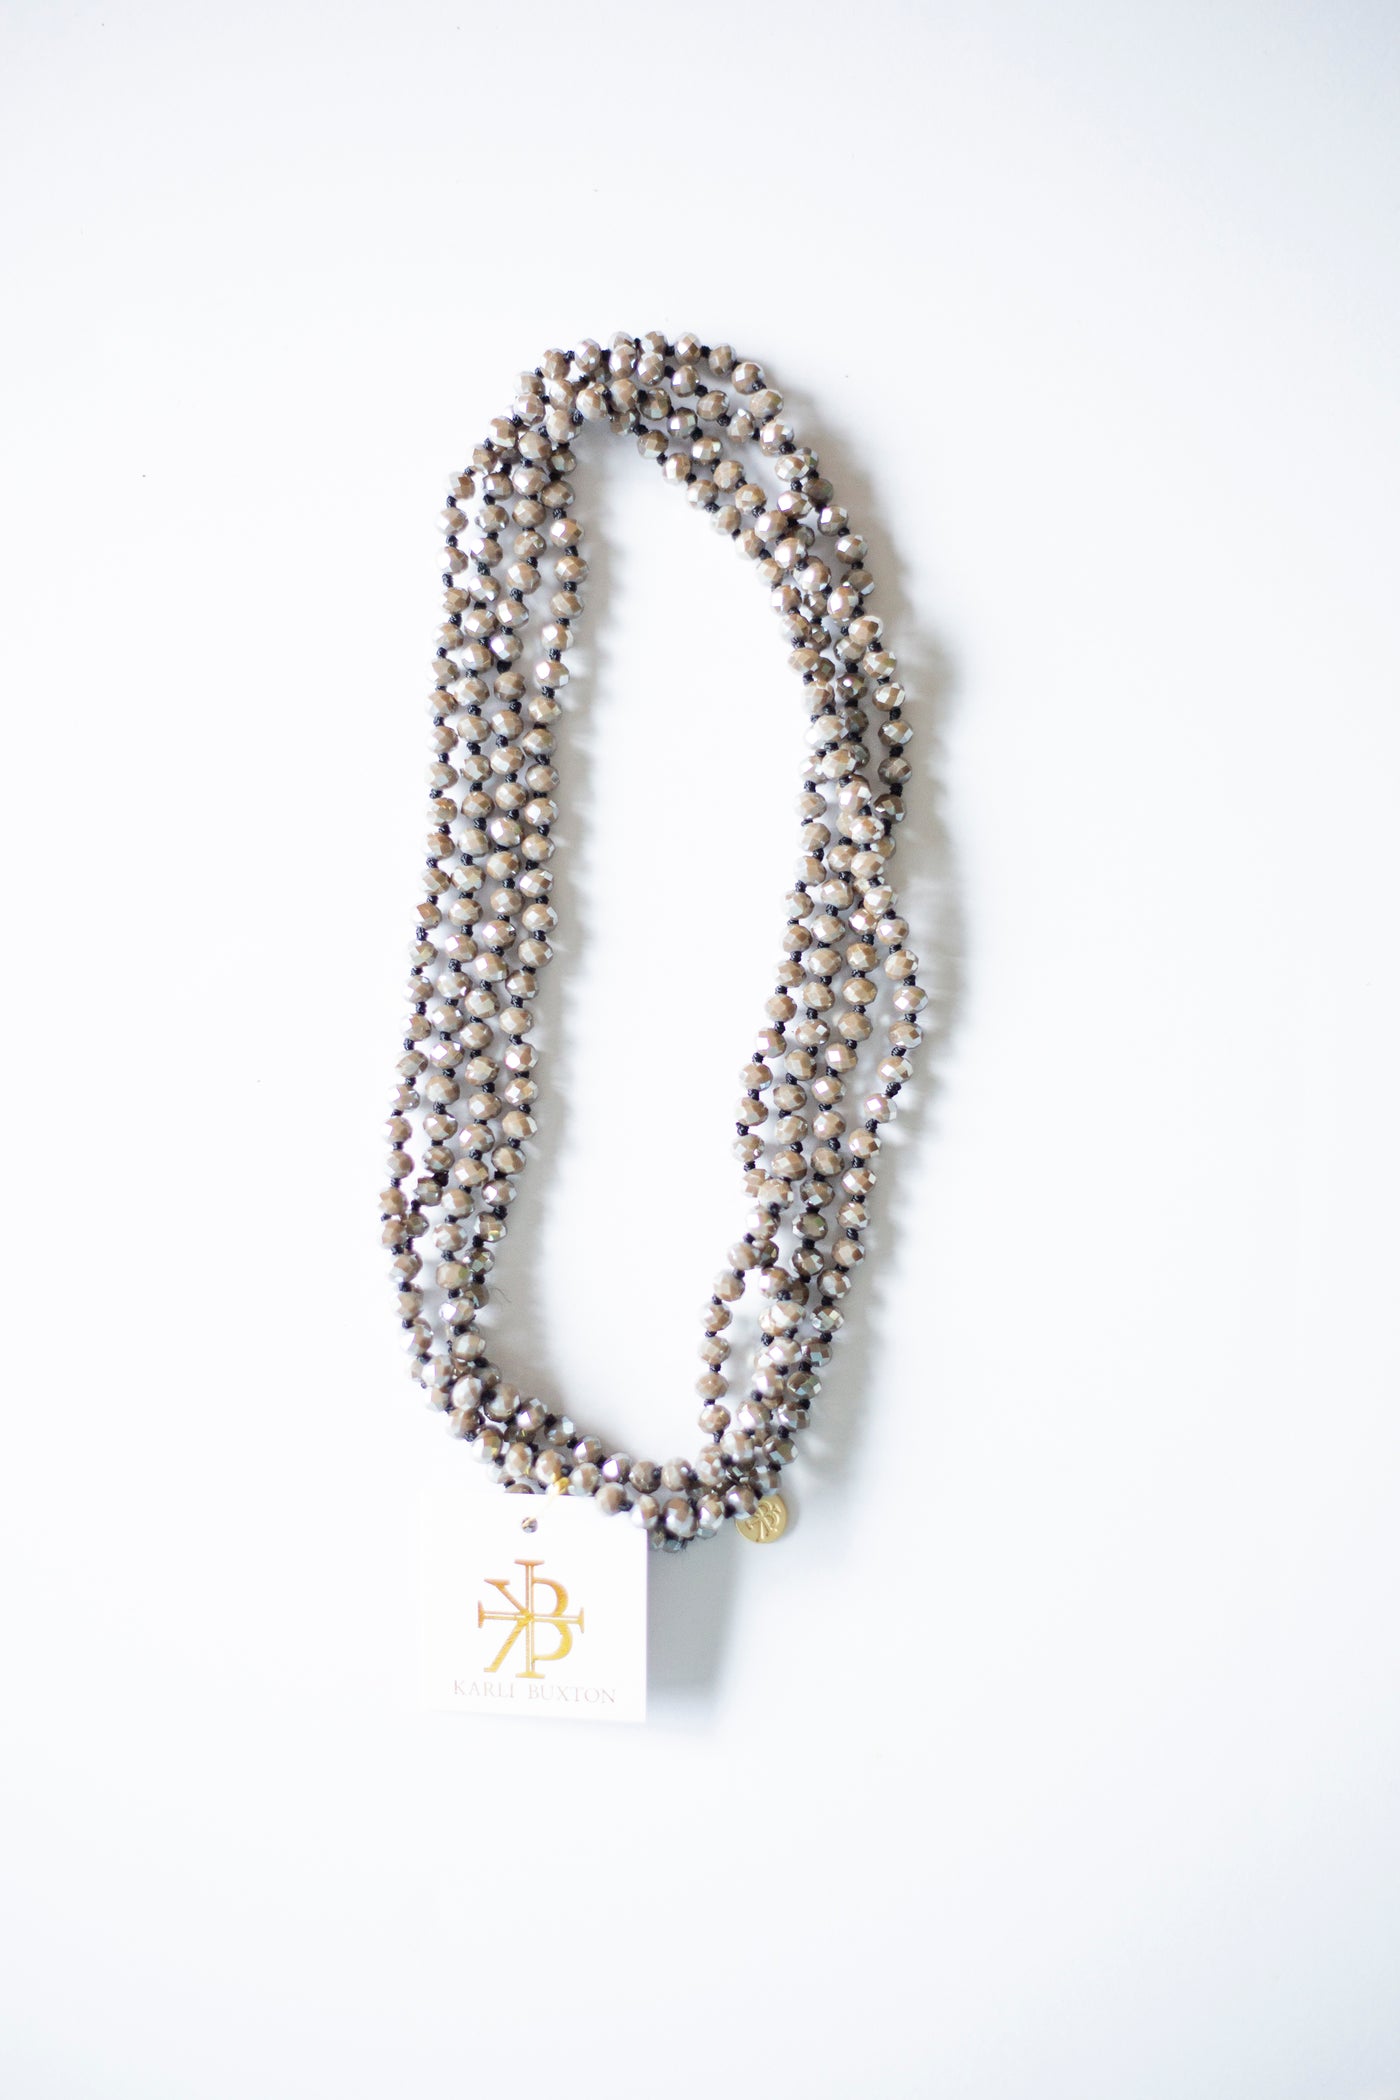 Taupe Crystal Layer Necklace by Karli Buxton - Corinne an Affordable Women's Clothing Boutique in the US USA